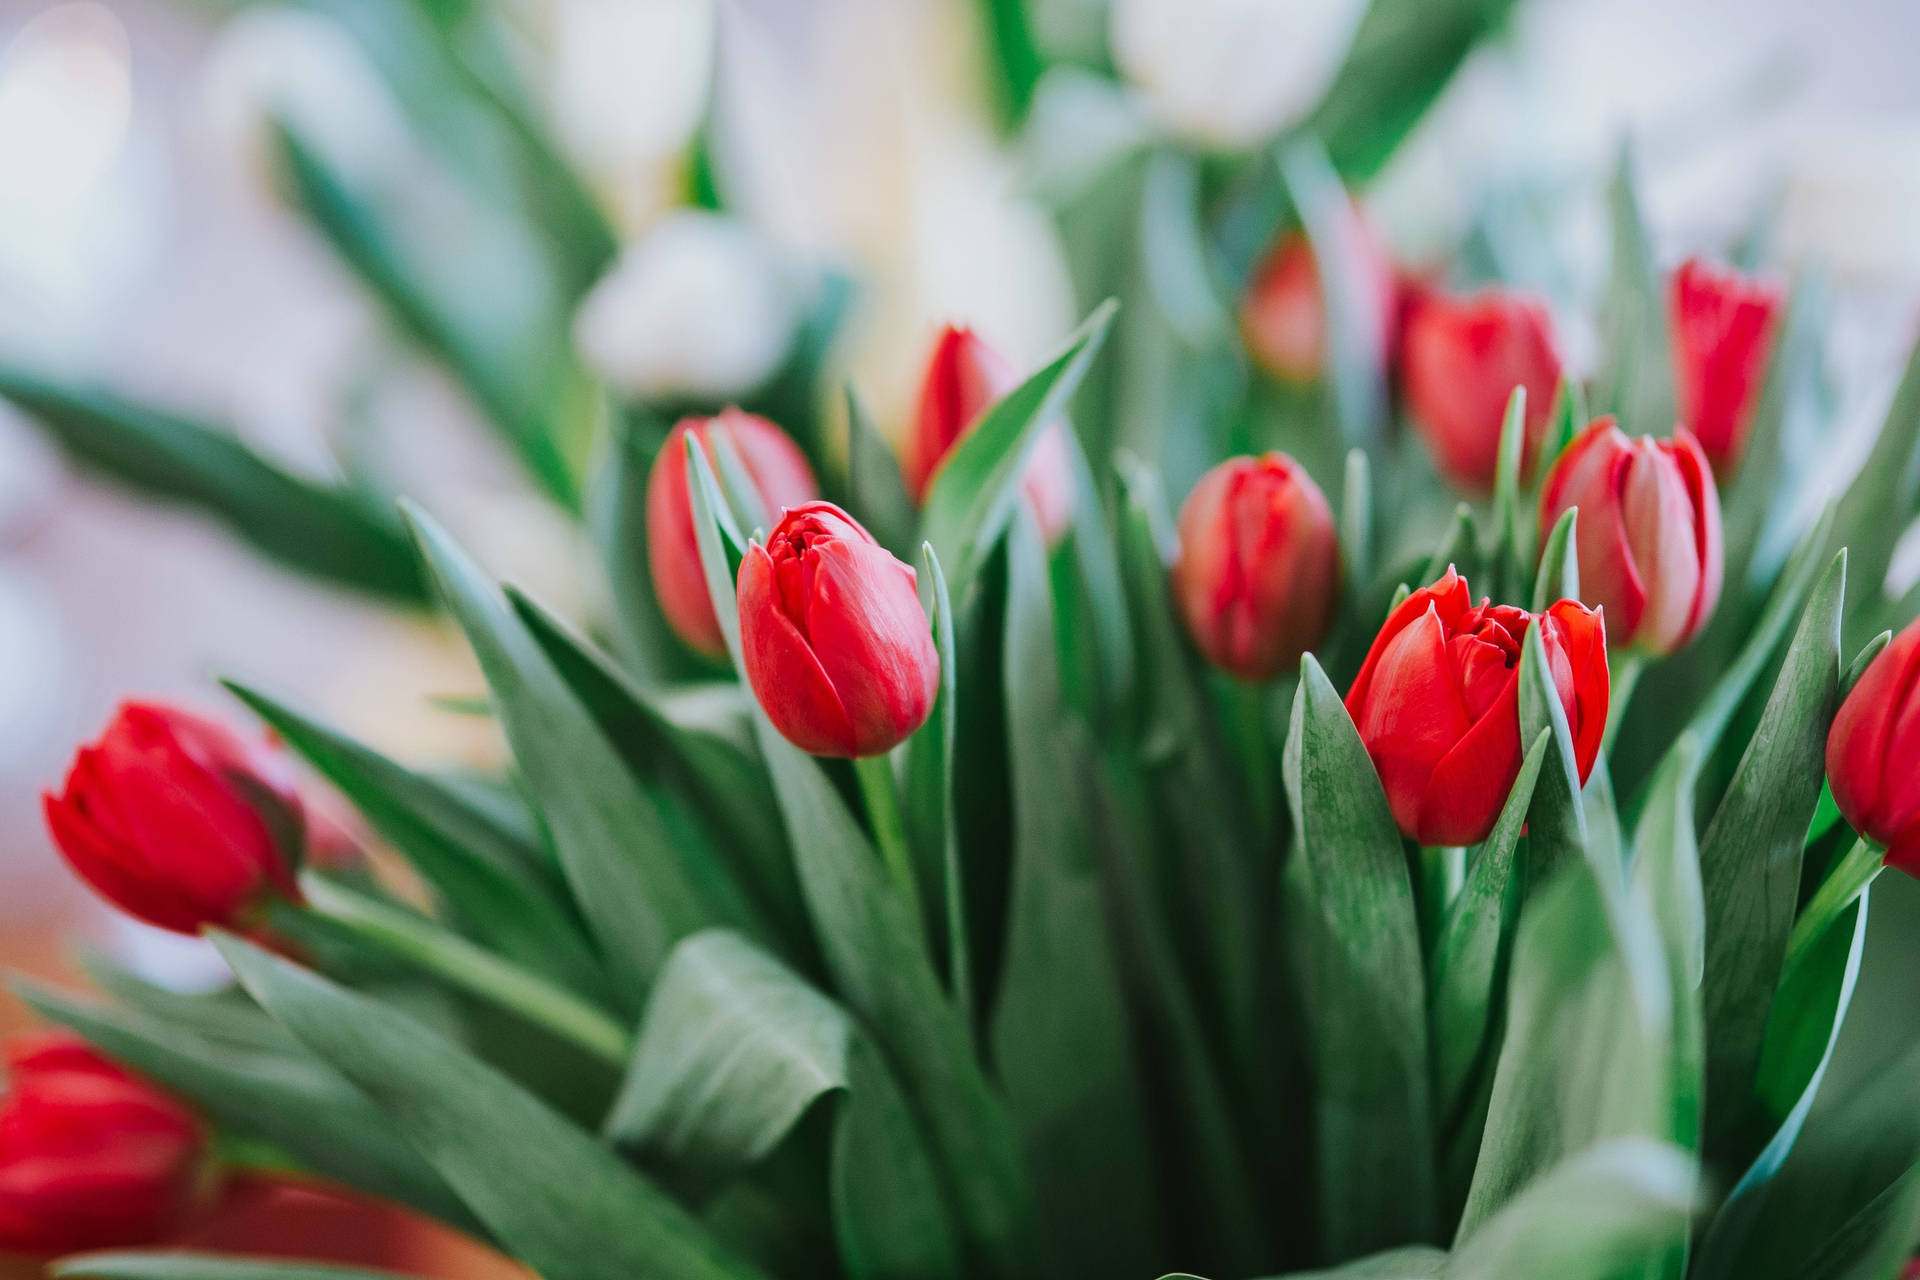 Green Leaves And Red Tulips Wallpaper